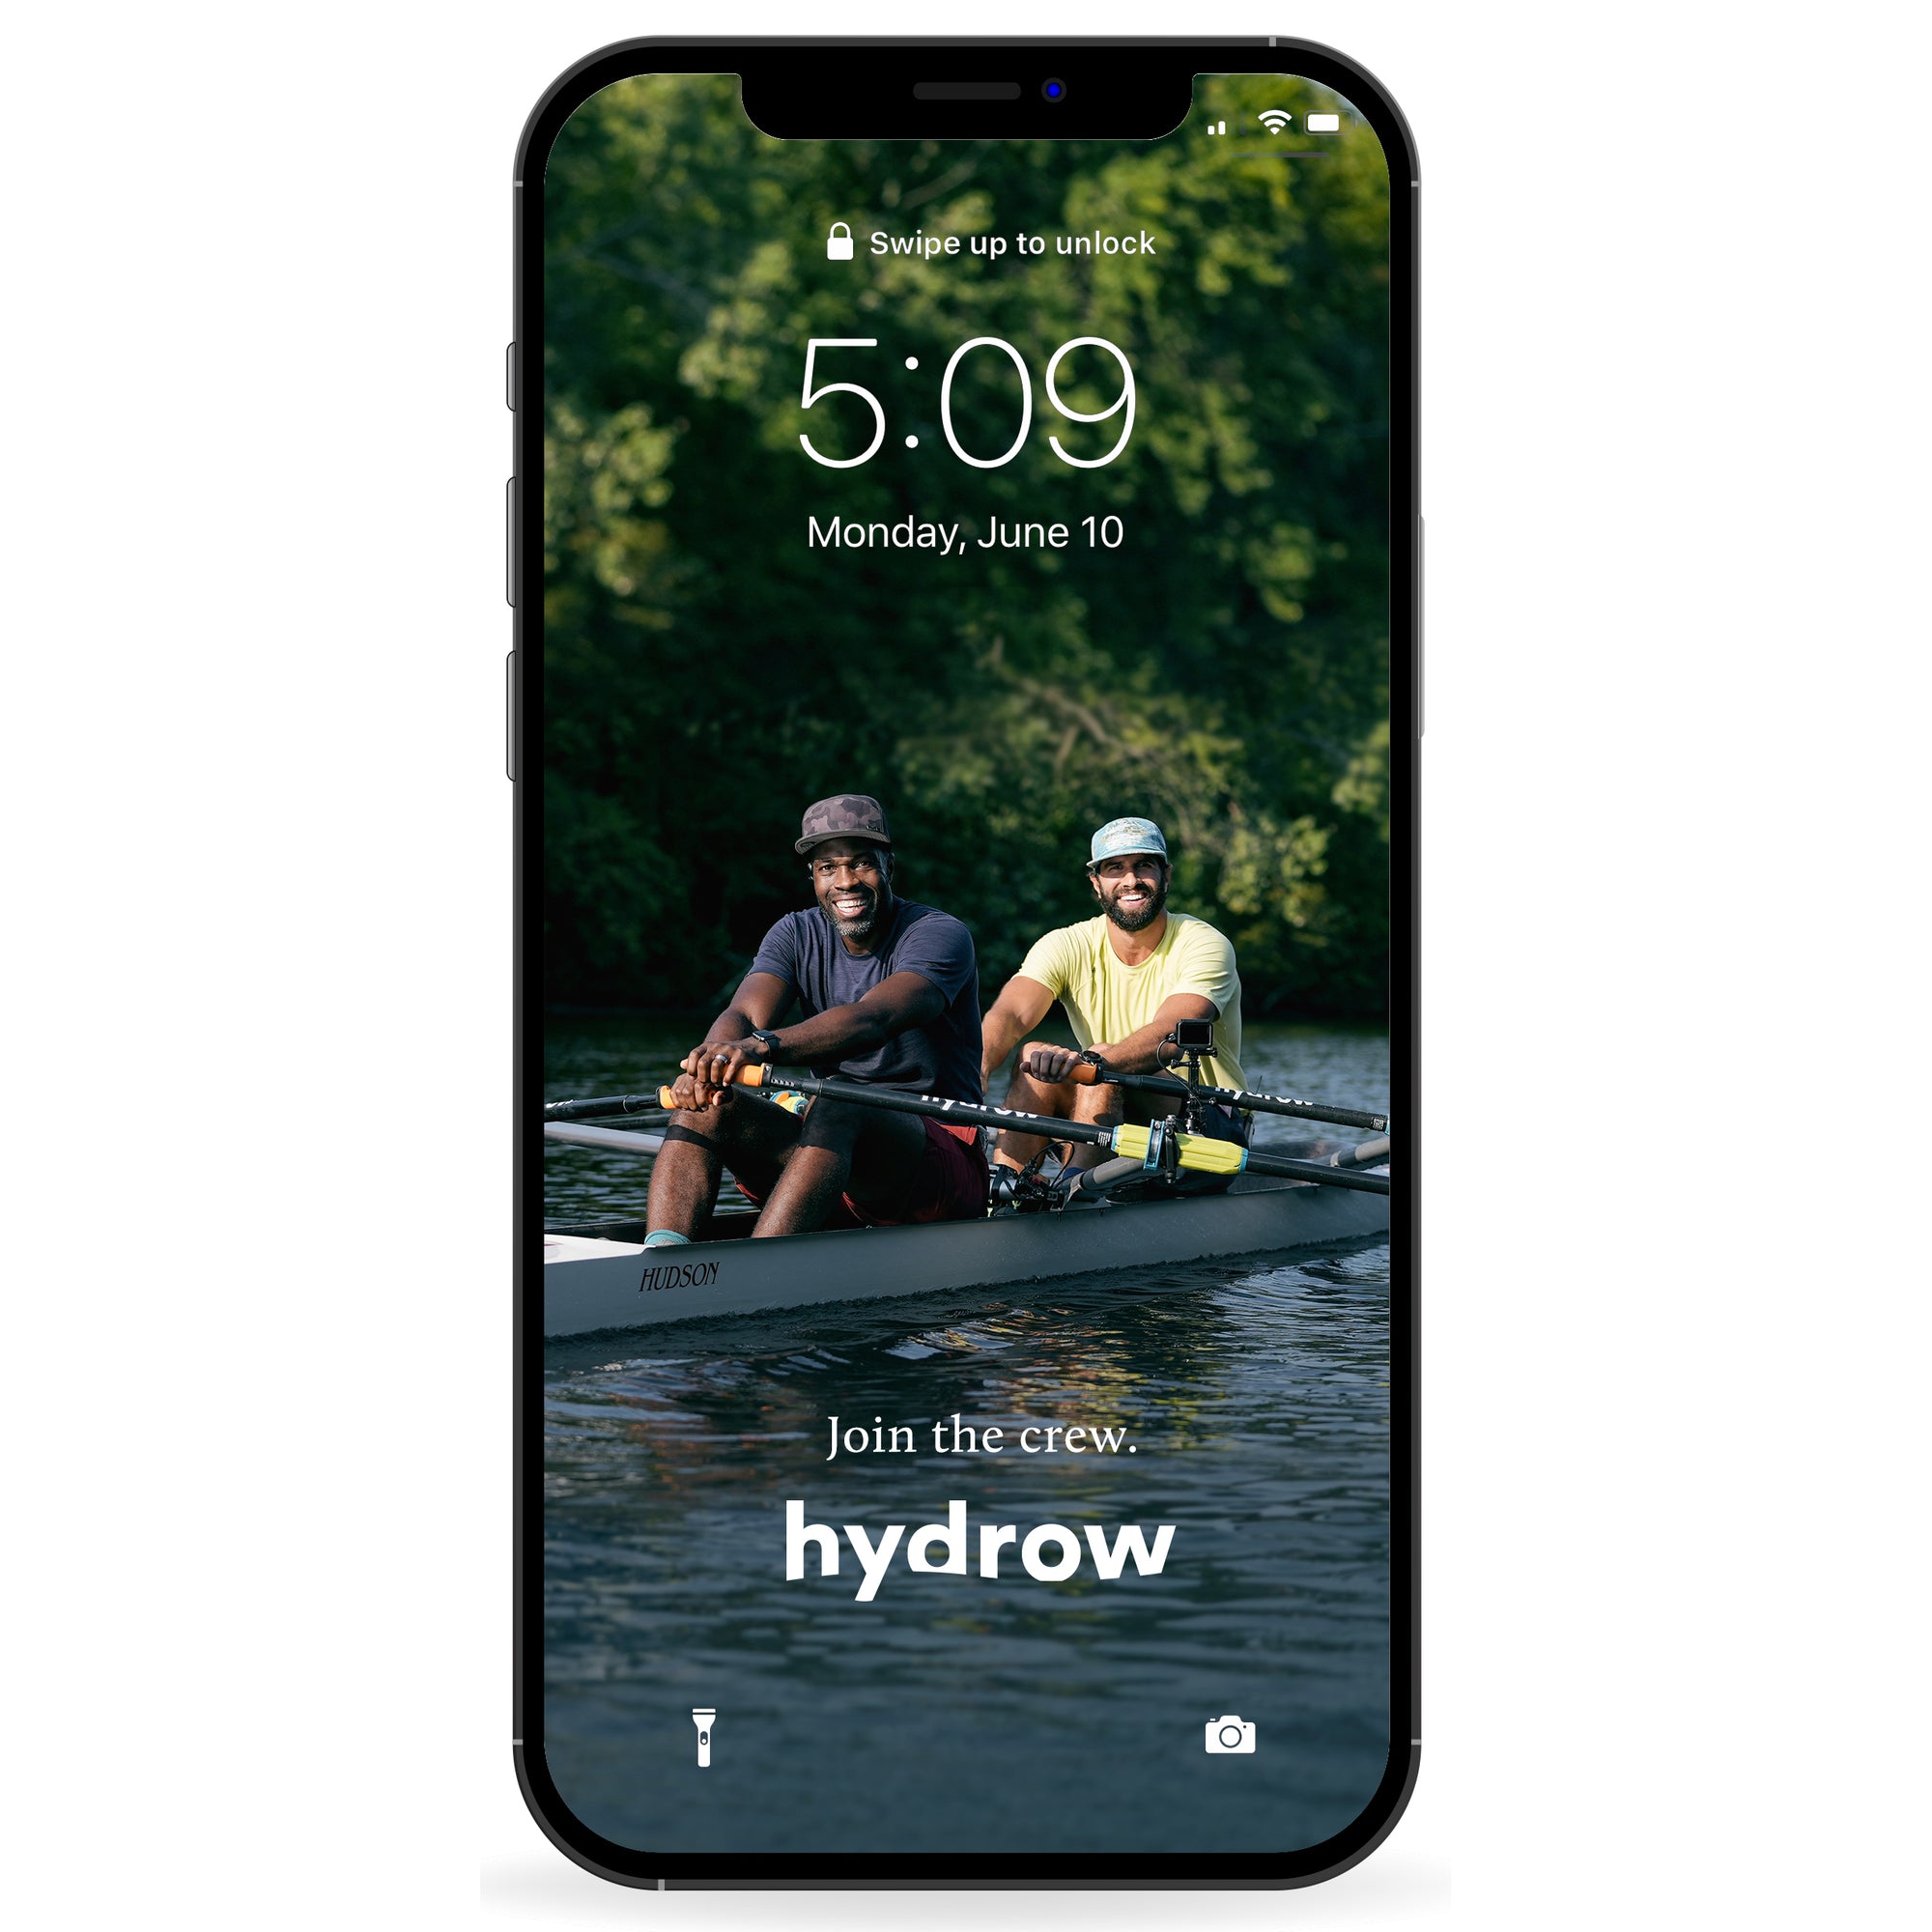 phone wallpaper featuring 2 people rowing in boat and text "Join the crew. hydrow"